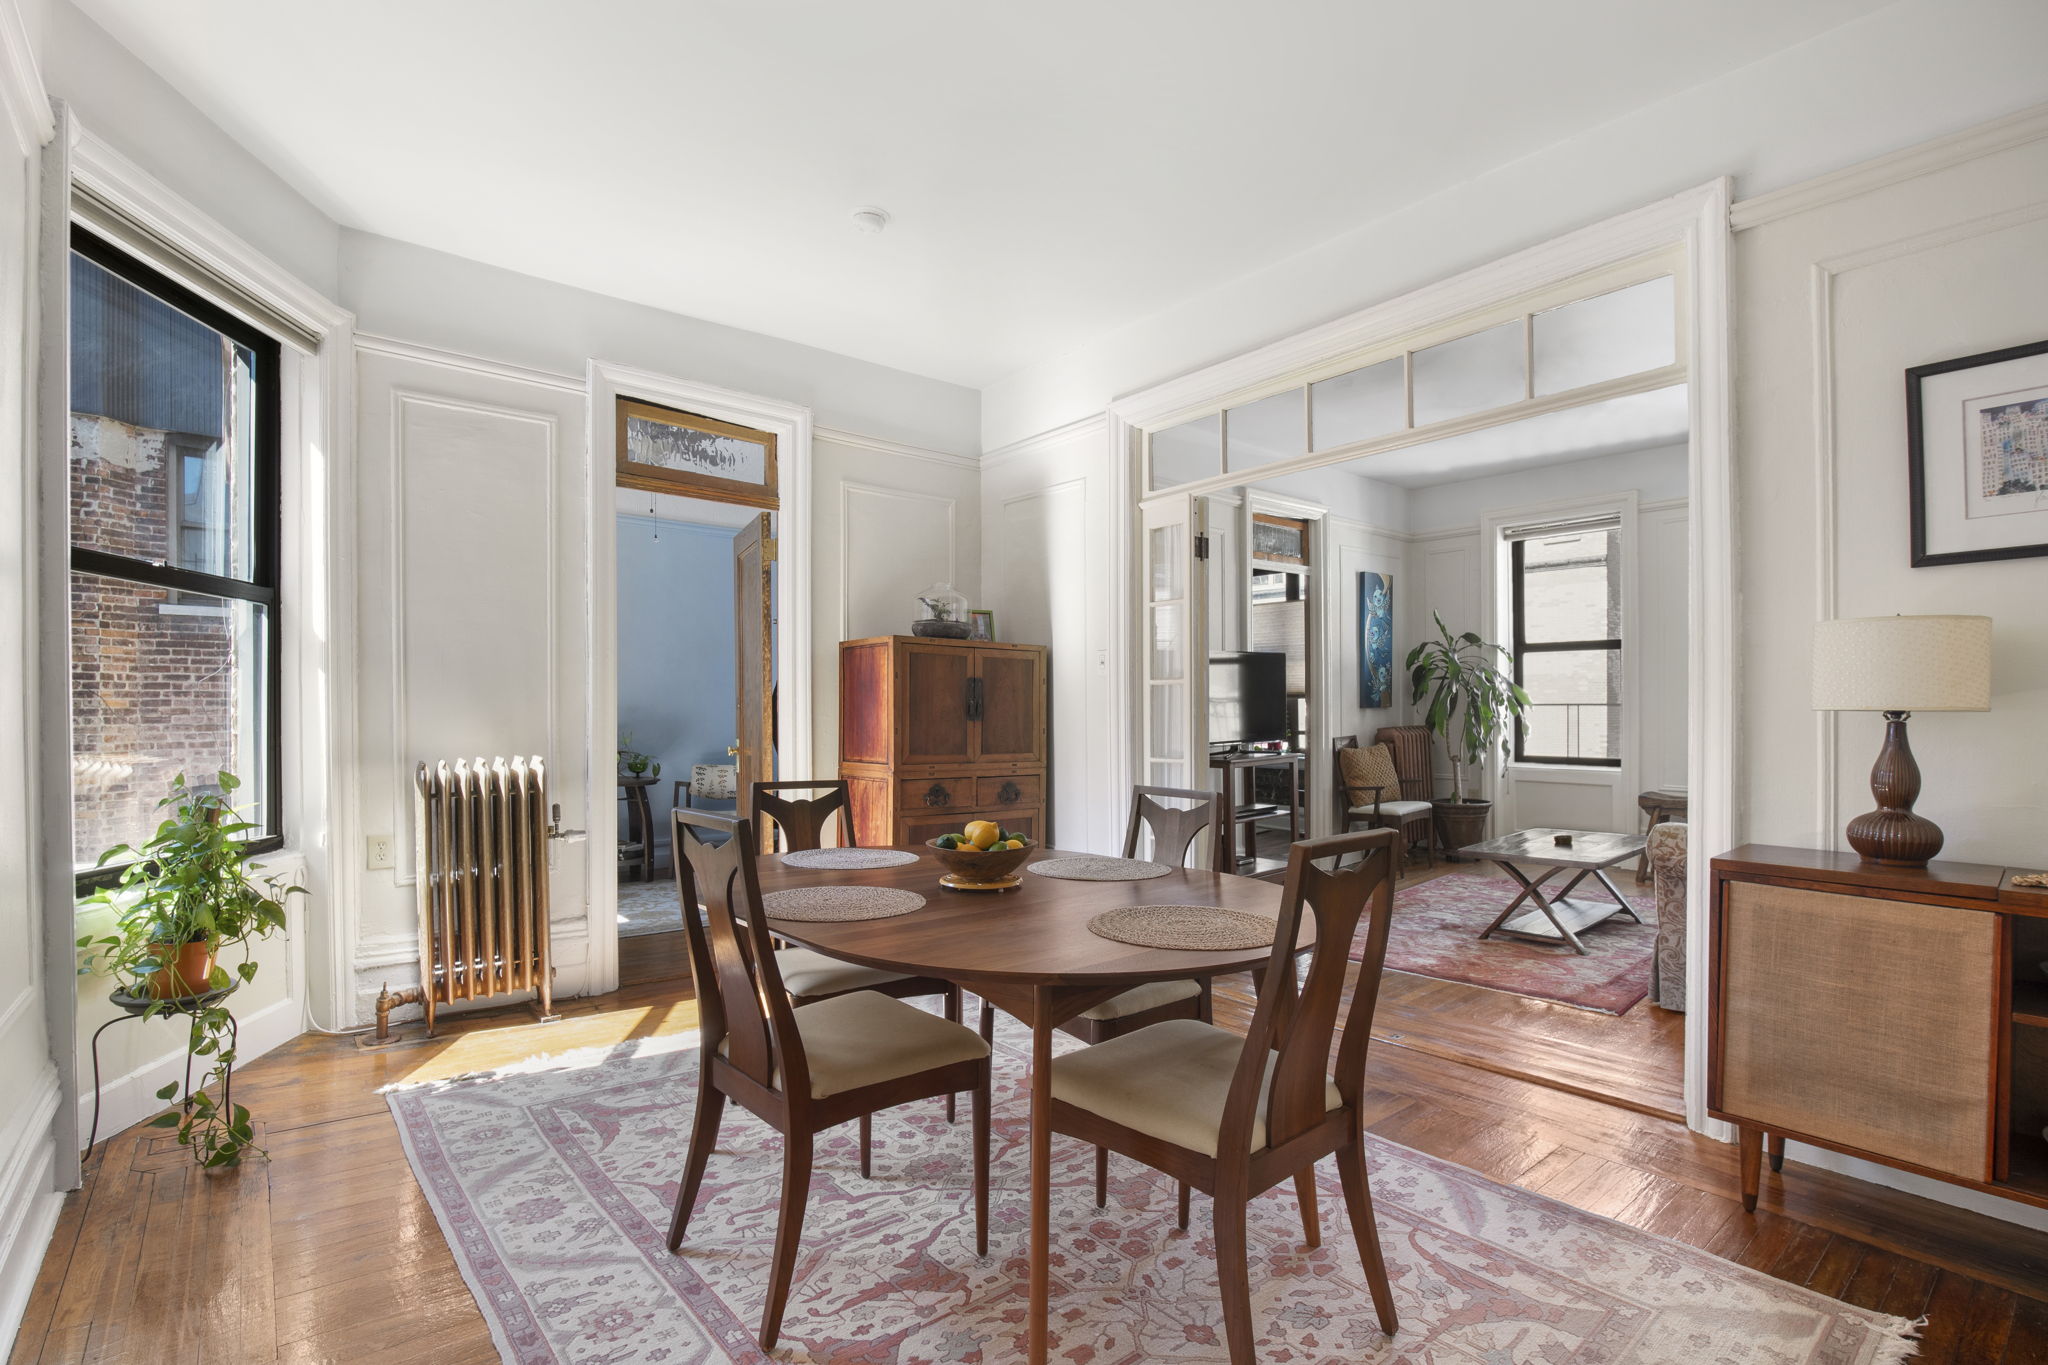 Spring into the new NY and own a two bedroom light filled home for under 500, 000.